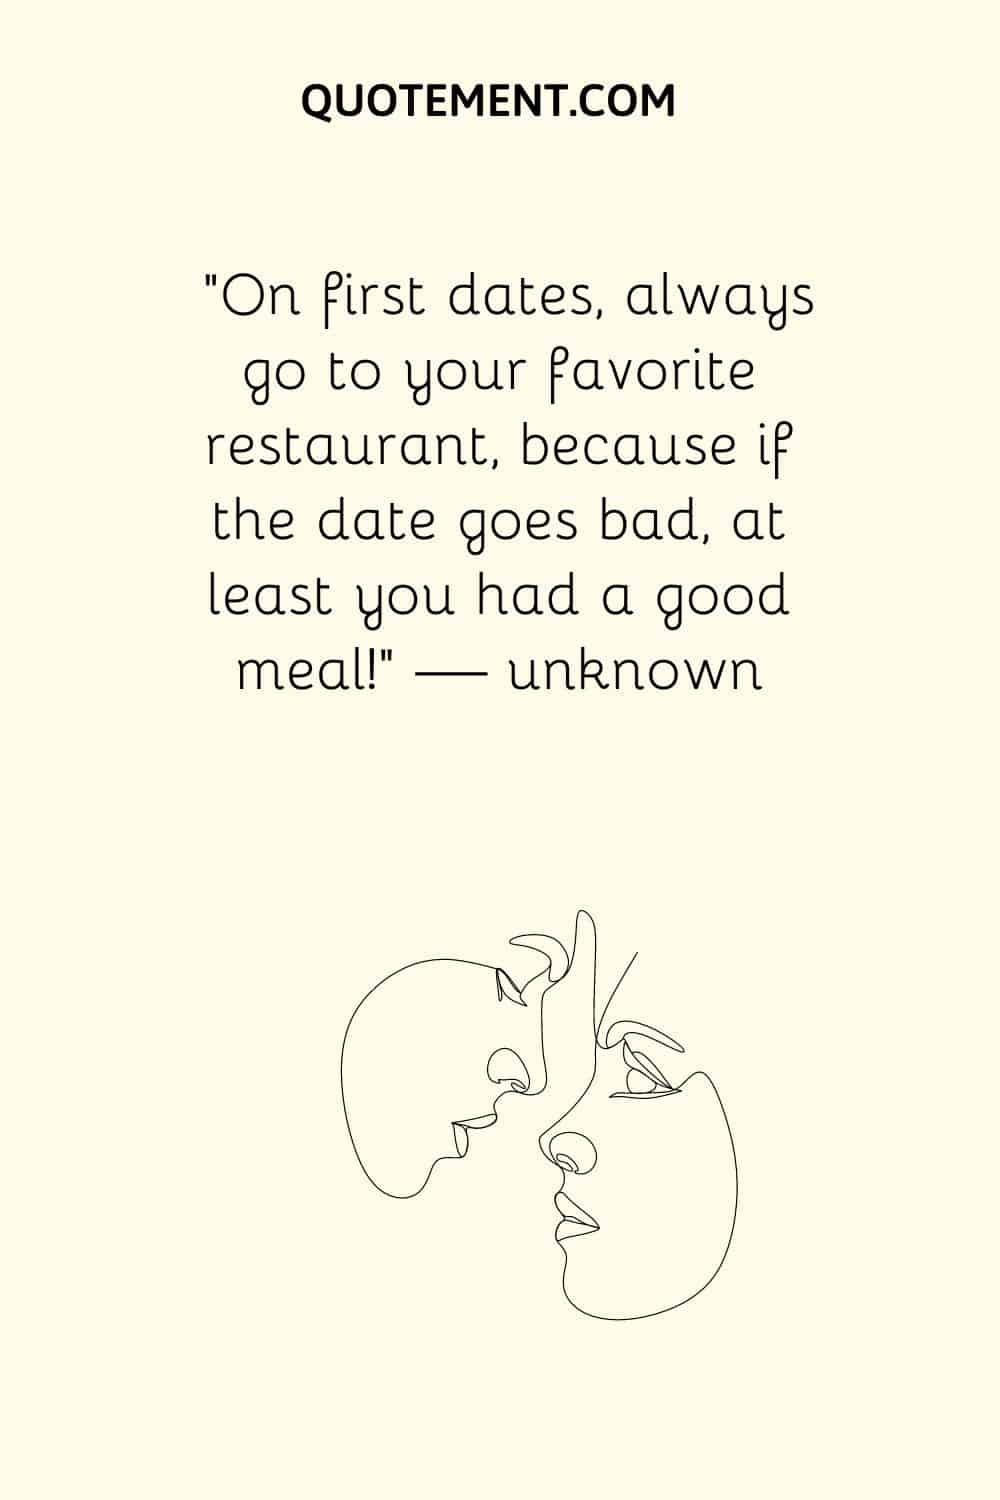 On first dates, always go to your favorite restaurant, because if the date goes bad, at least you had a good meal